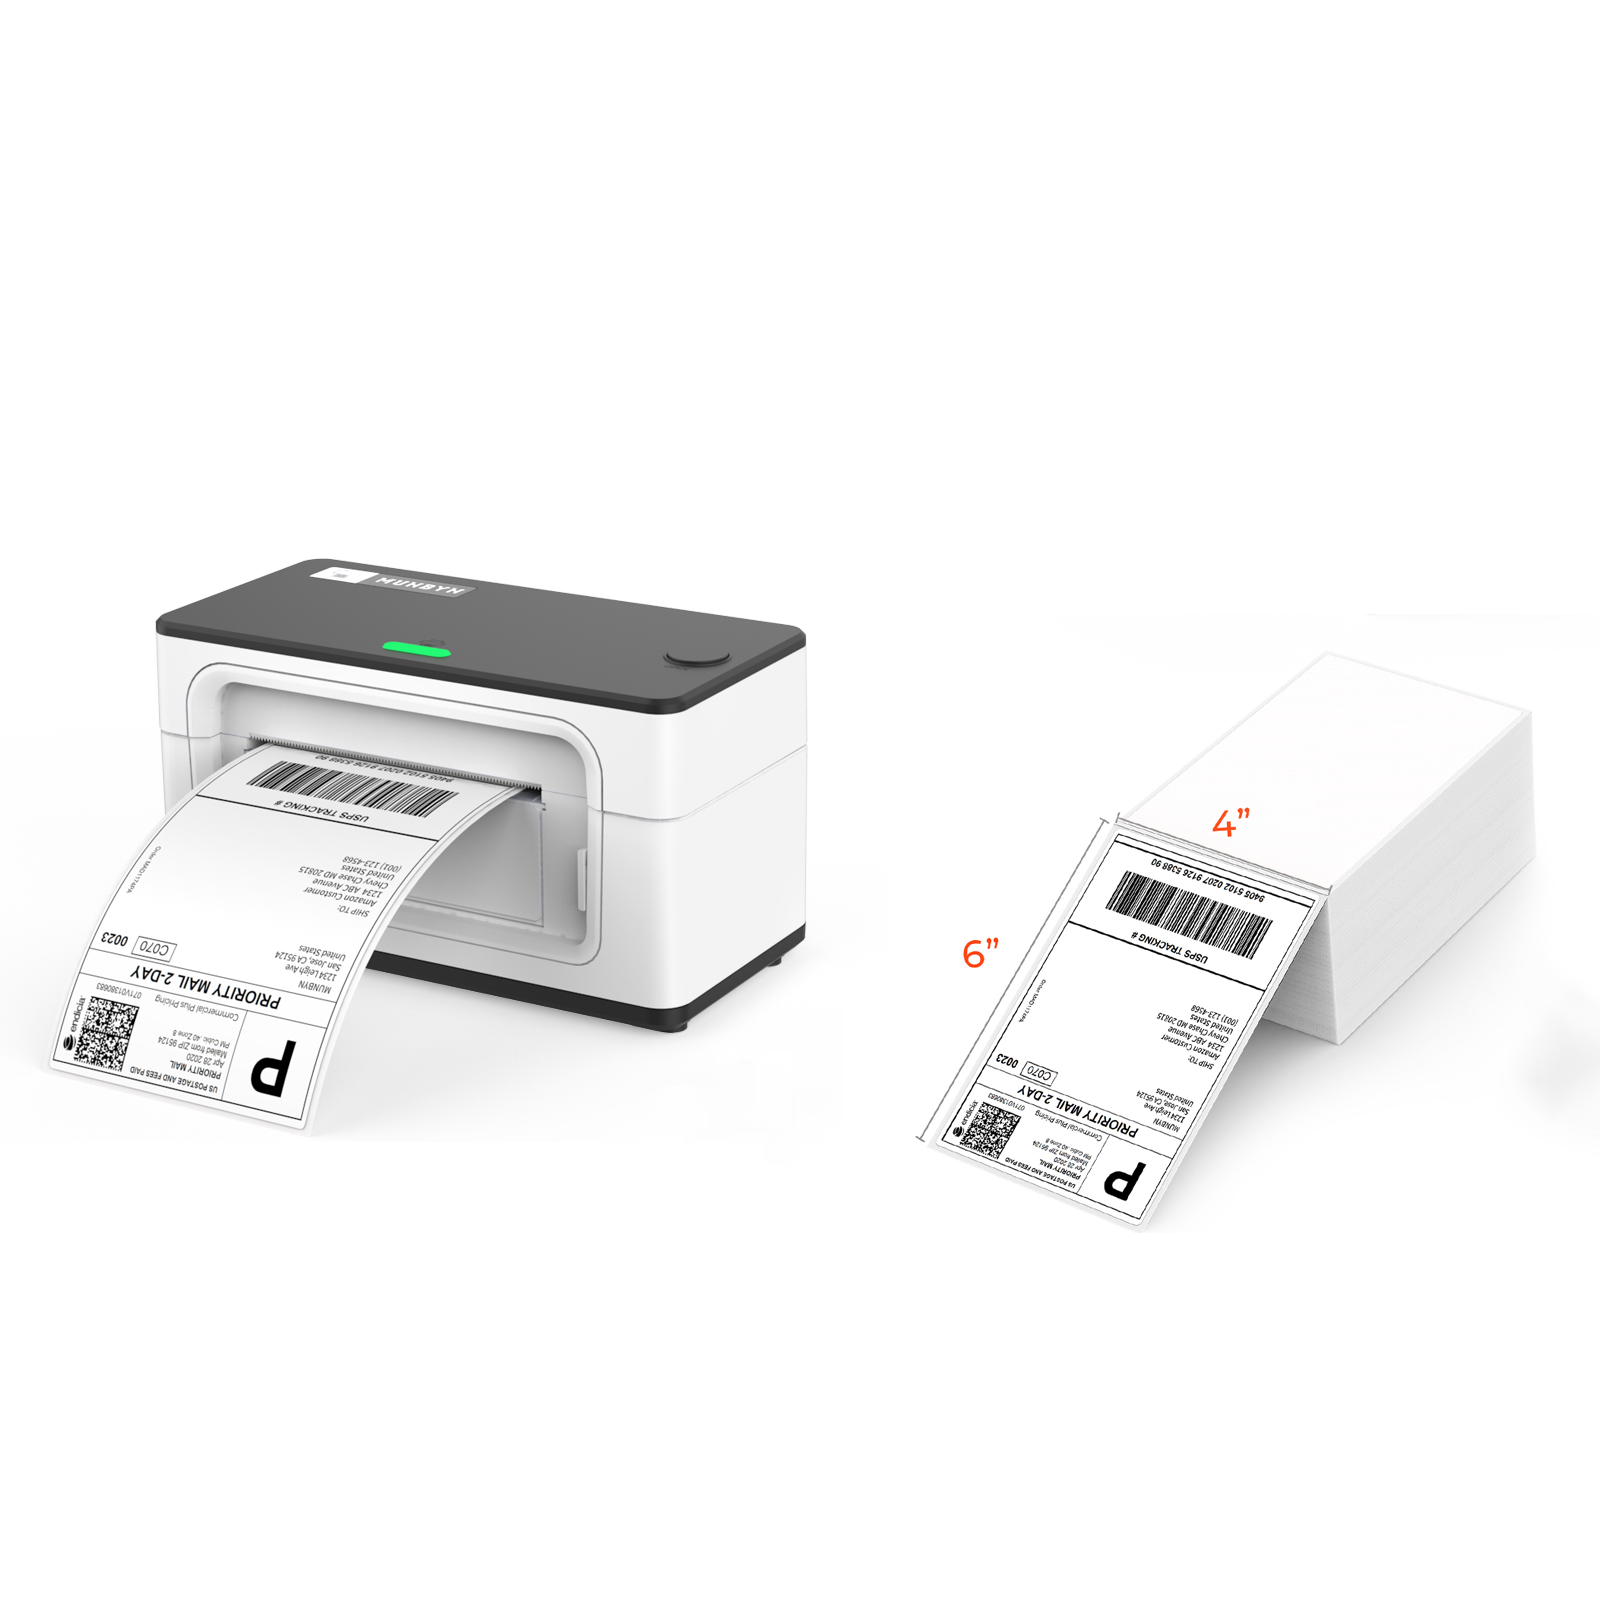 The MUNBYN P941 Pro 300DPI printer kit includes a thermal printer and a stack of shipping labels, ideal for small business owners in Australia.